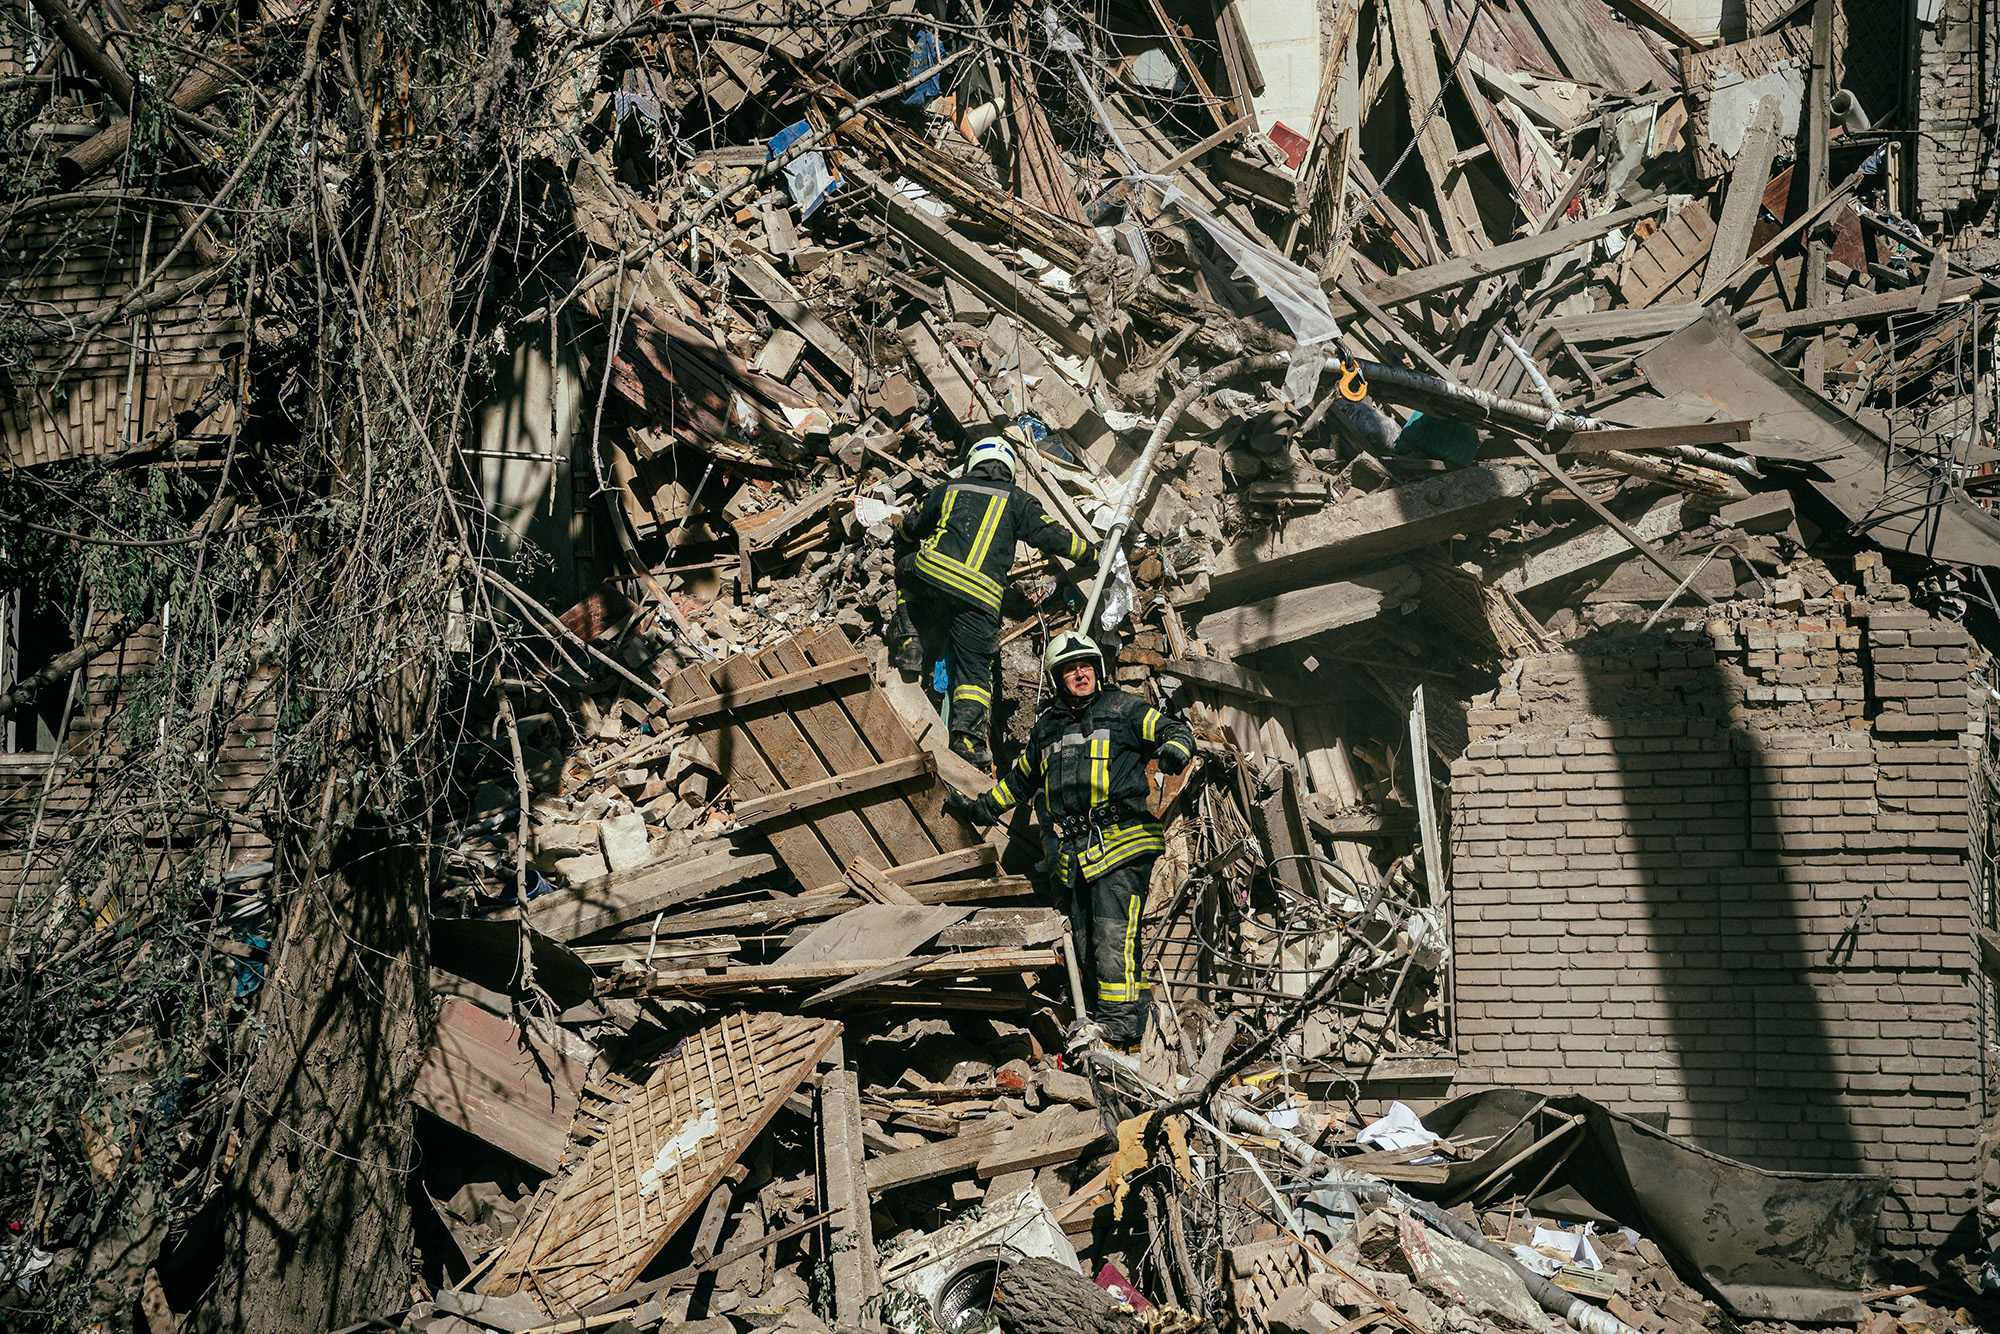 Ukrainian firefighters looking for survivors in the rubble after a missile strike in Zaporizhzhia, Ukraine, on October 6.